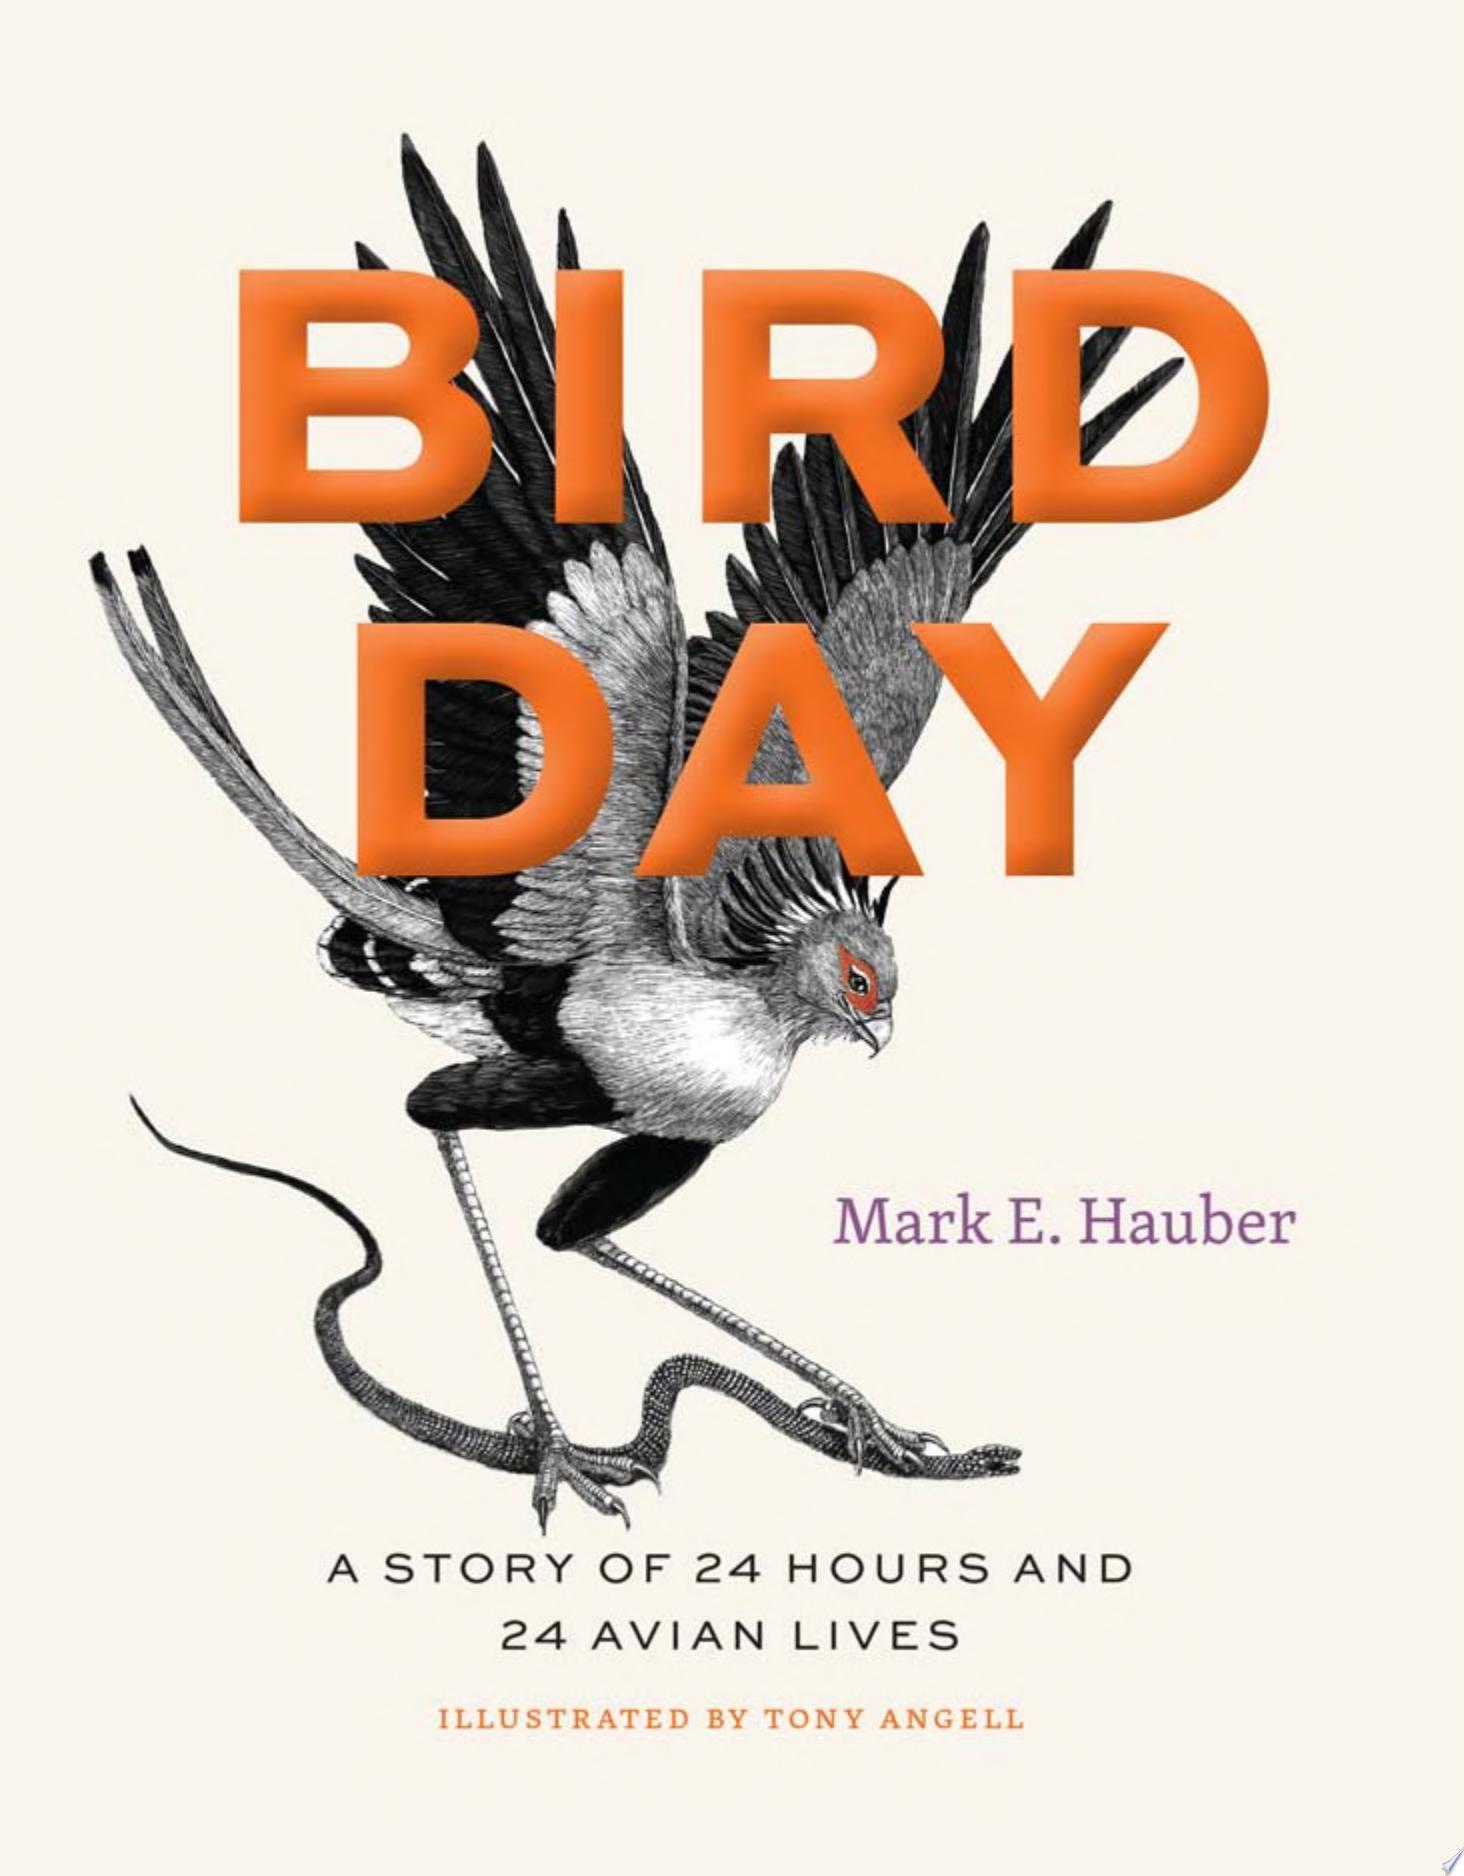 Image for "Bird Day"